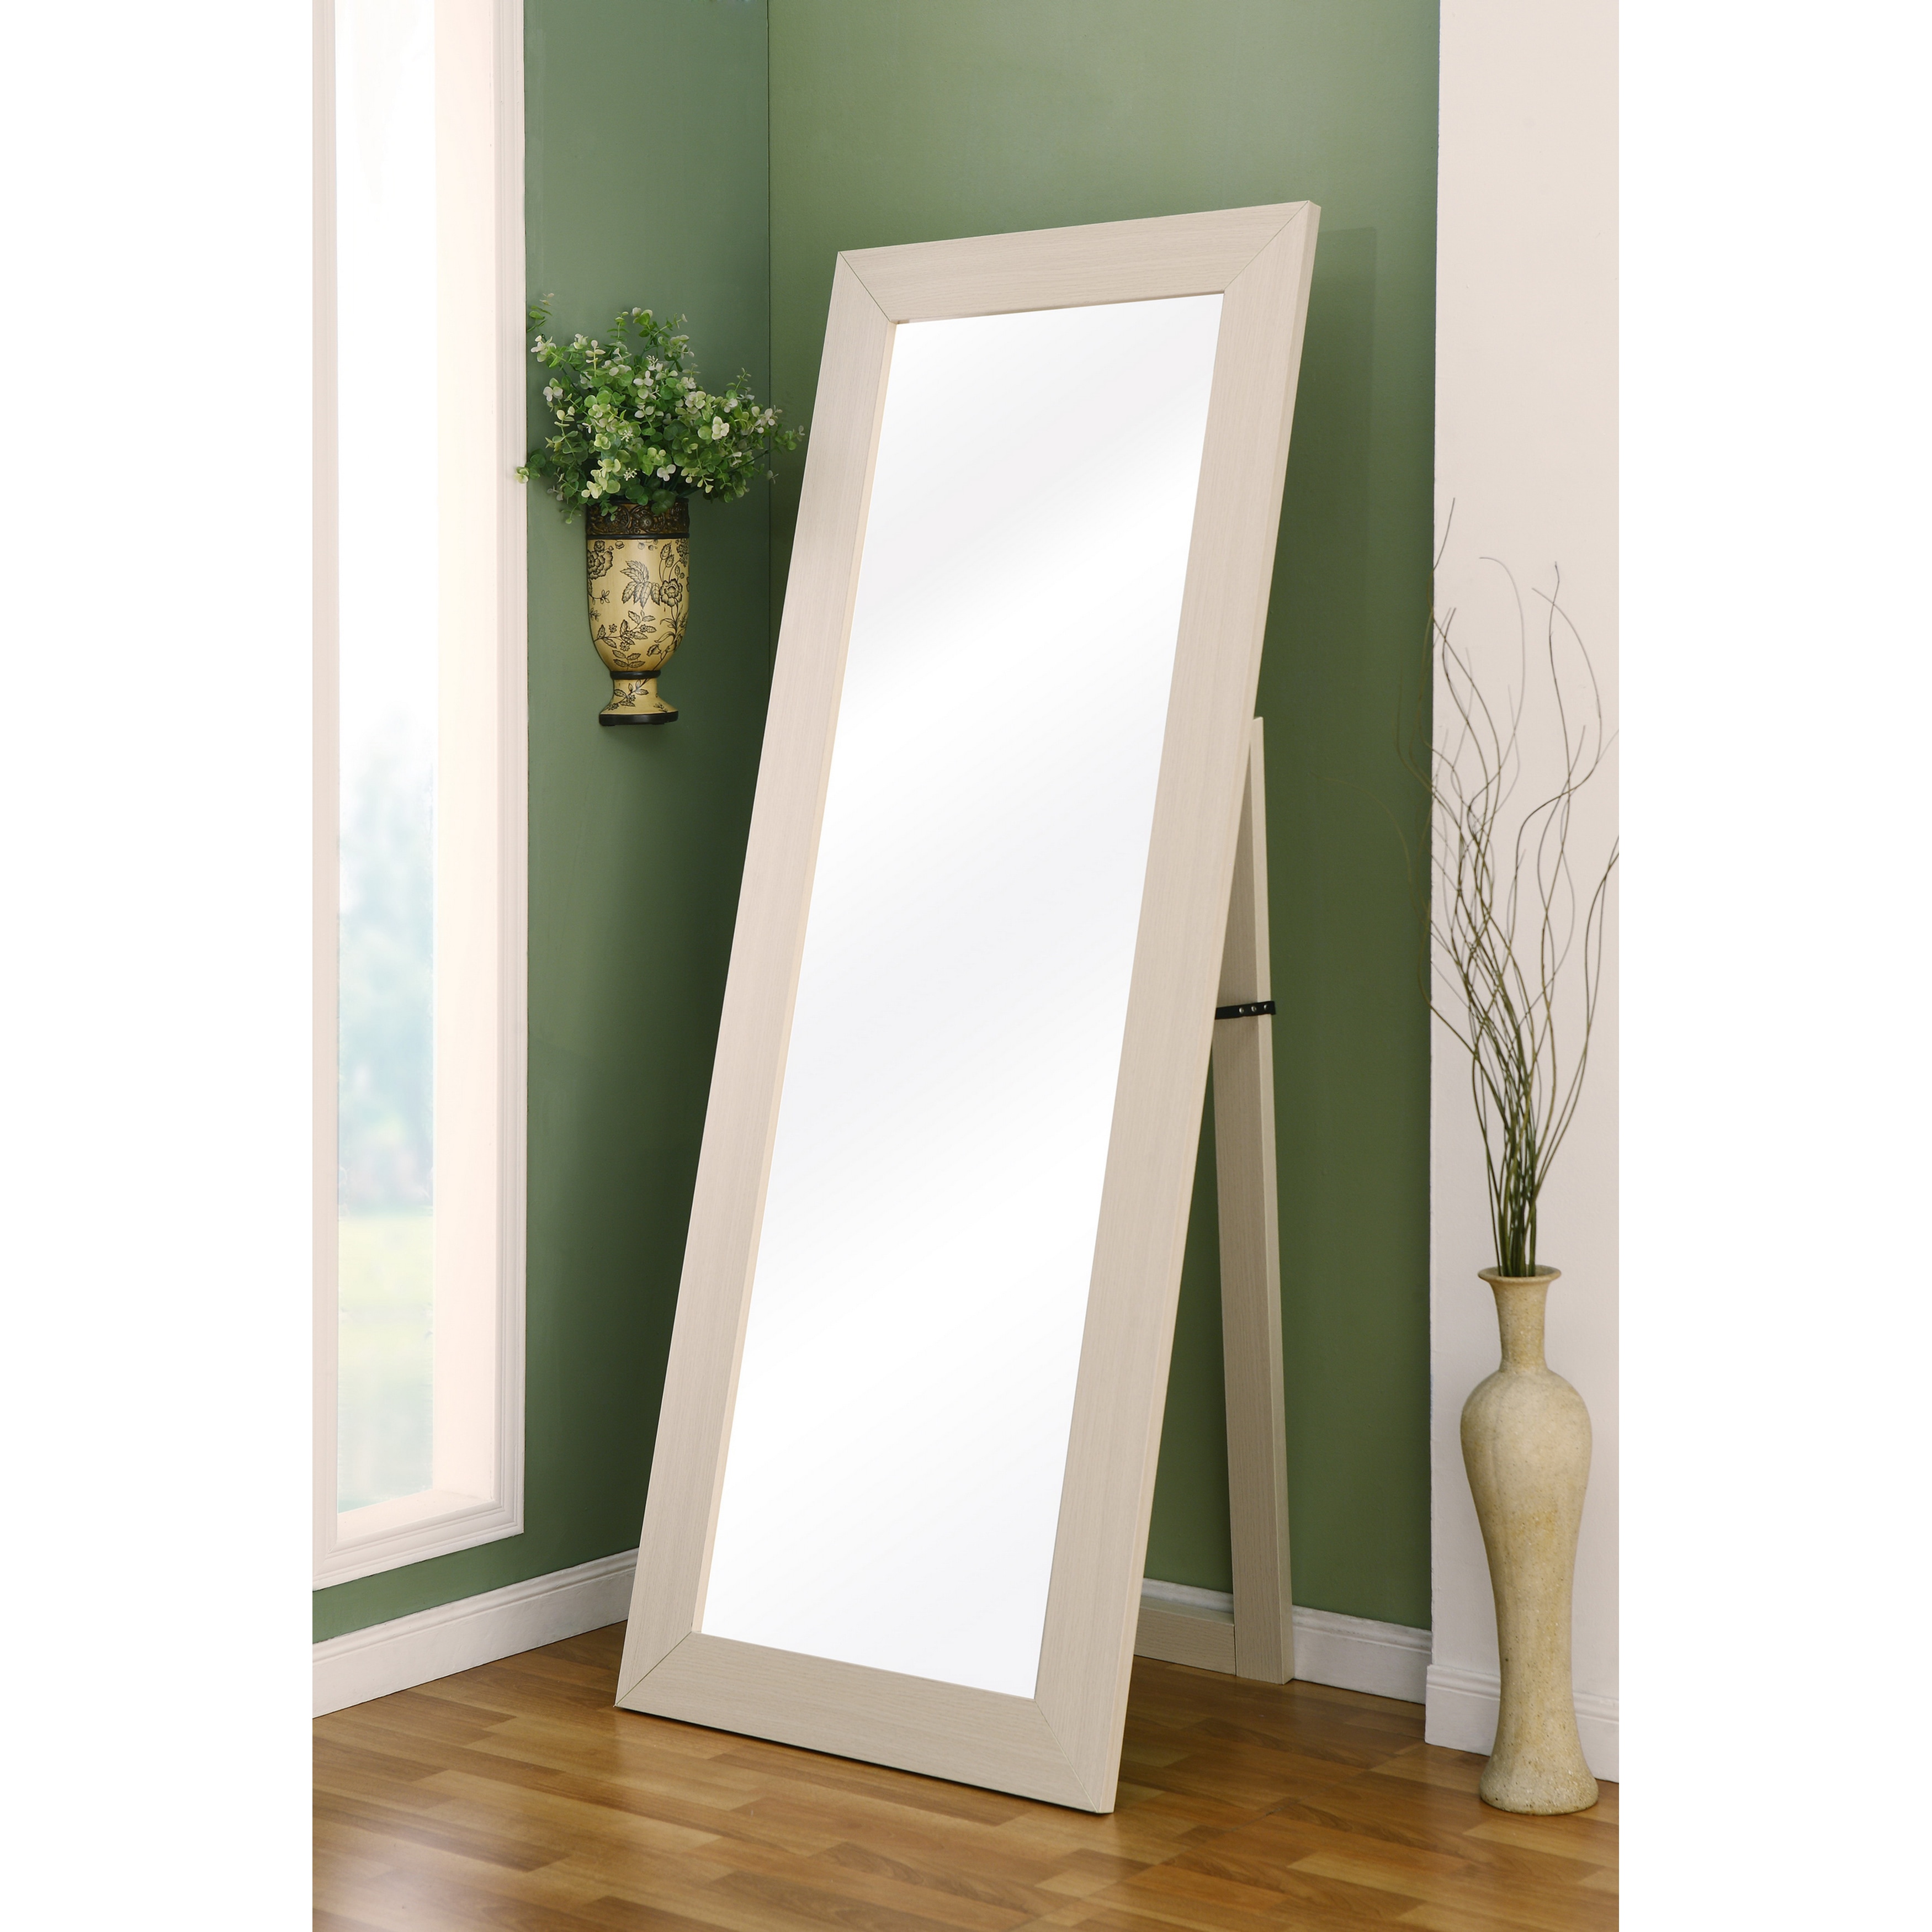 Furniture Of America Emily Ivory Full Body Cheval Mirror (Ivory finishMaterials Glass, MDF, wood veneerModern design with clean and fine linesA full body mirror framed with fresh ivory finishMirror is made for use against the wall and is nicely secured w